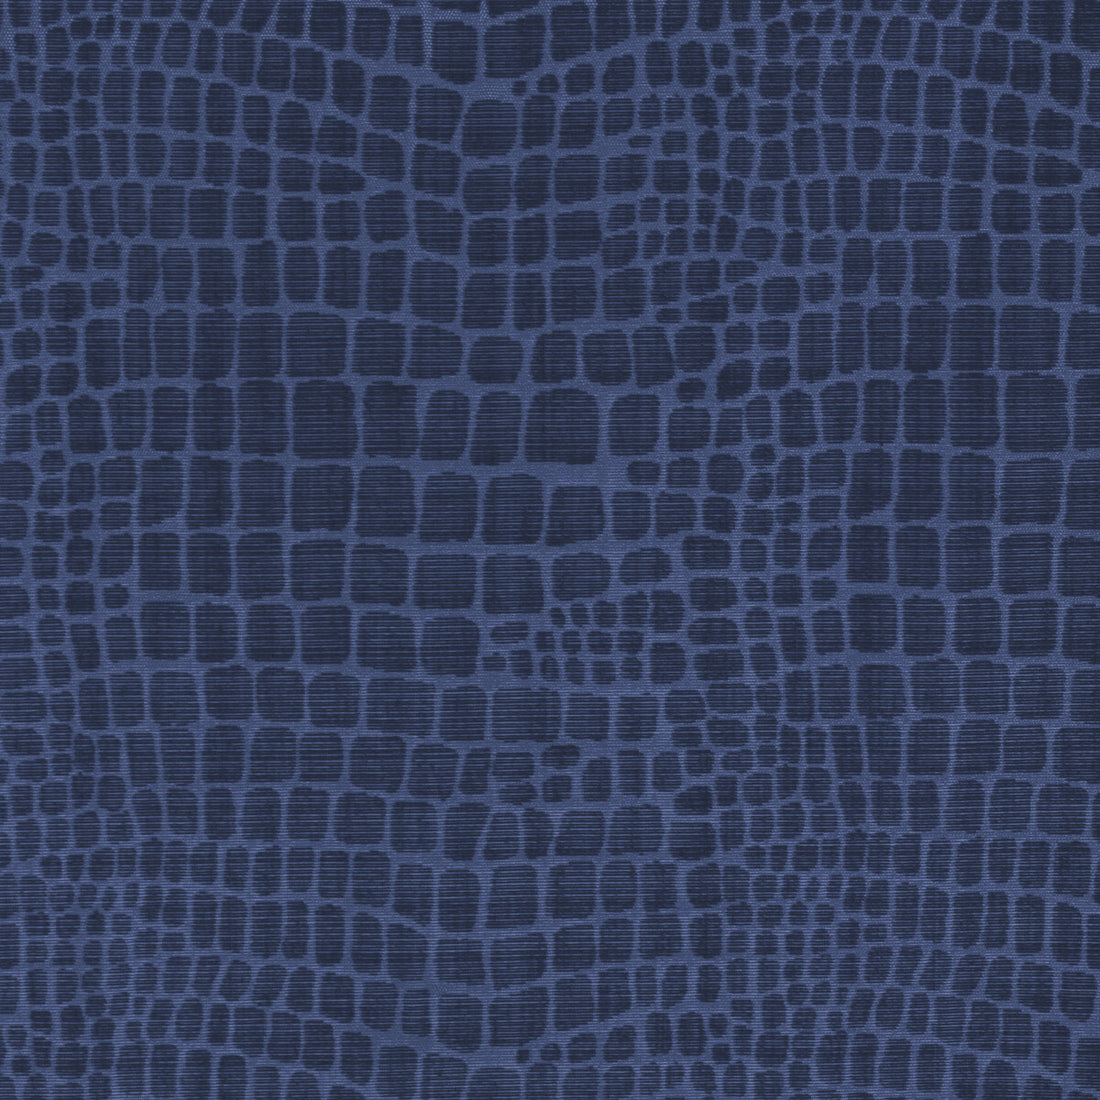 Croc Velvet fabric in sapphire color - pattern 8023140.50.0 - by Brunschwig &amp; Fils in the Celeste collection